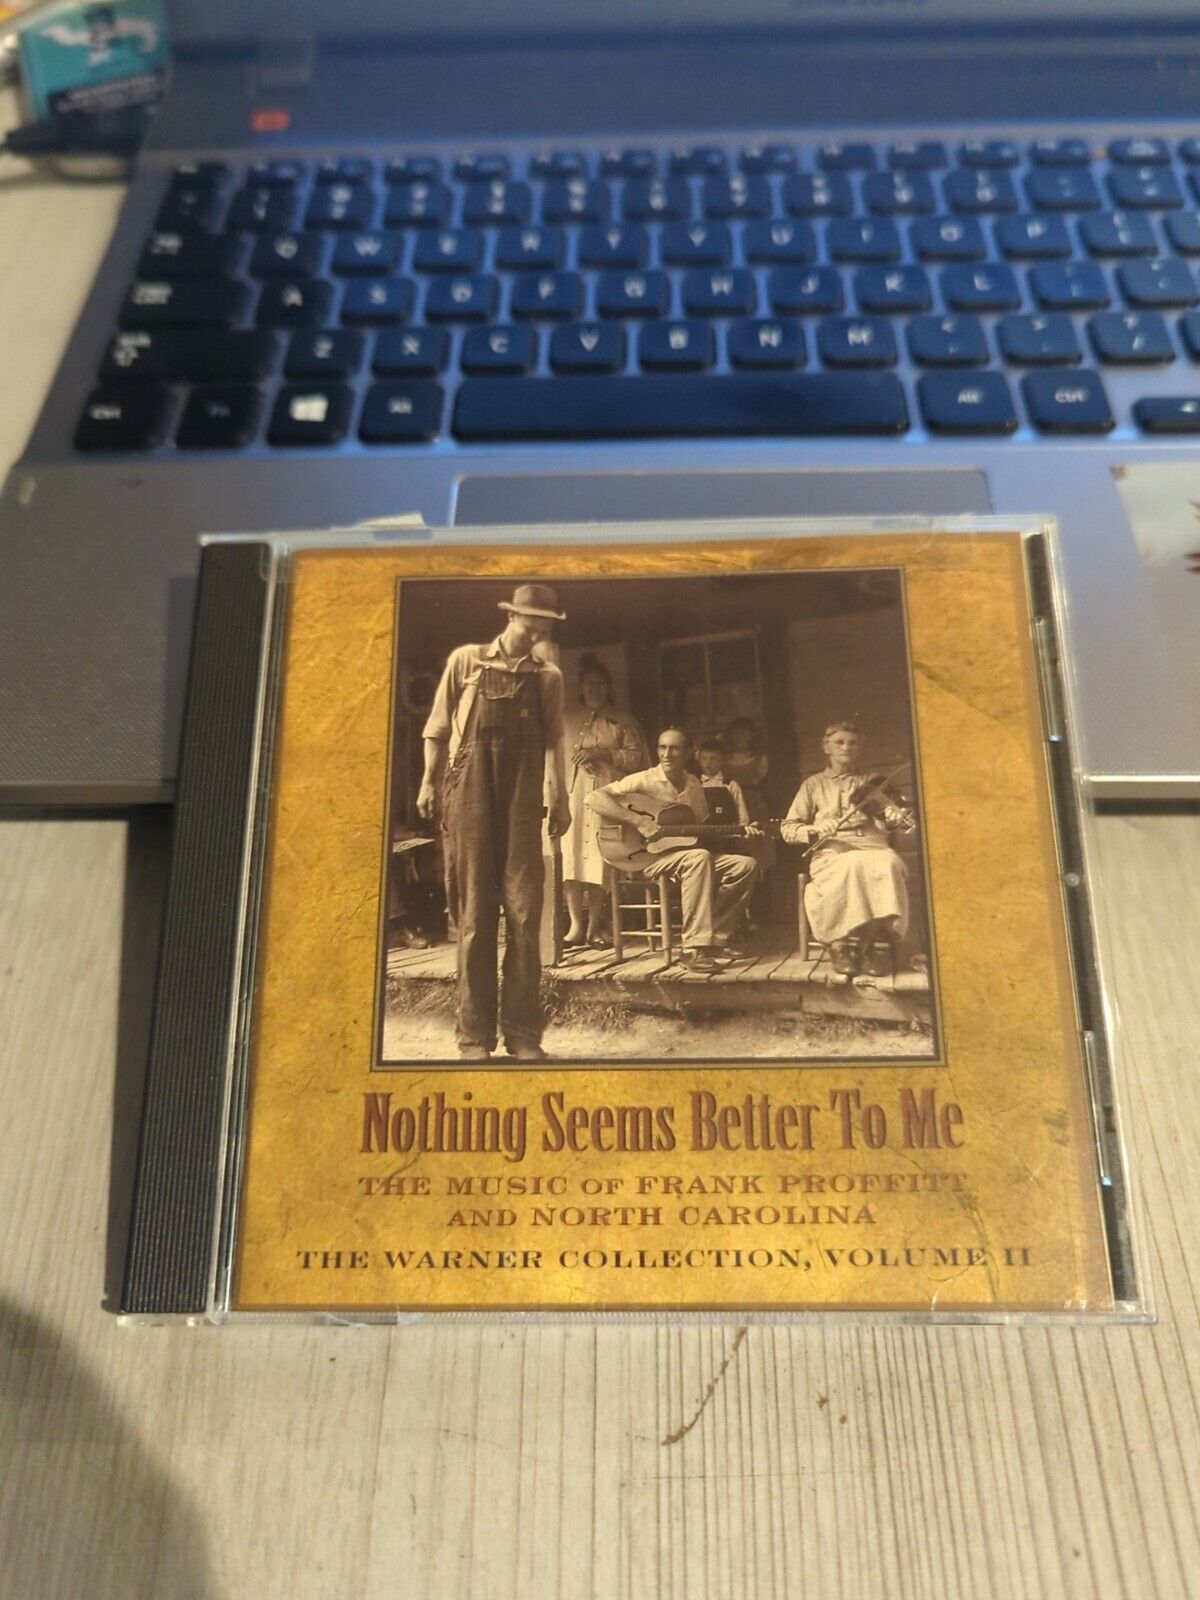 CD 2476 FRANK PROFFITT Nothing Seems Better To Me: Warner Collection, Vol. II